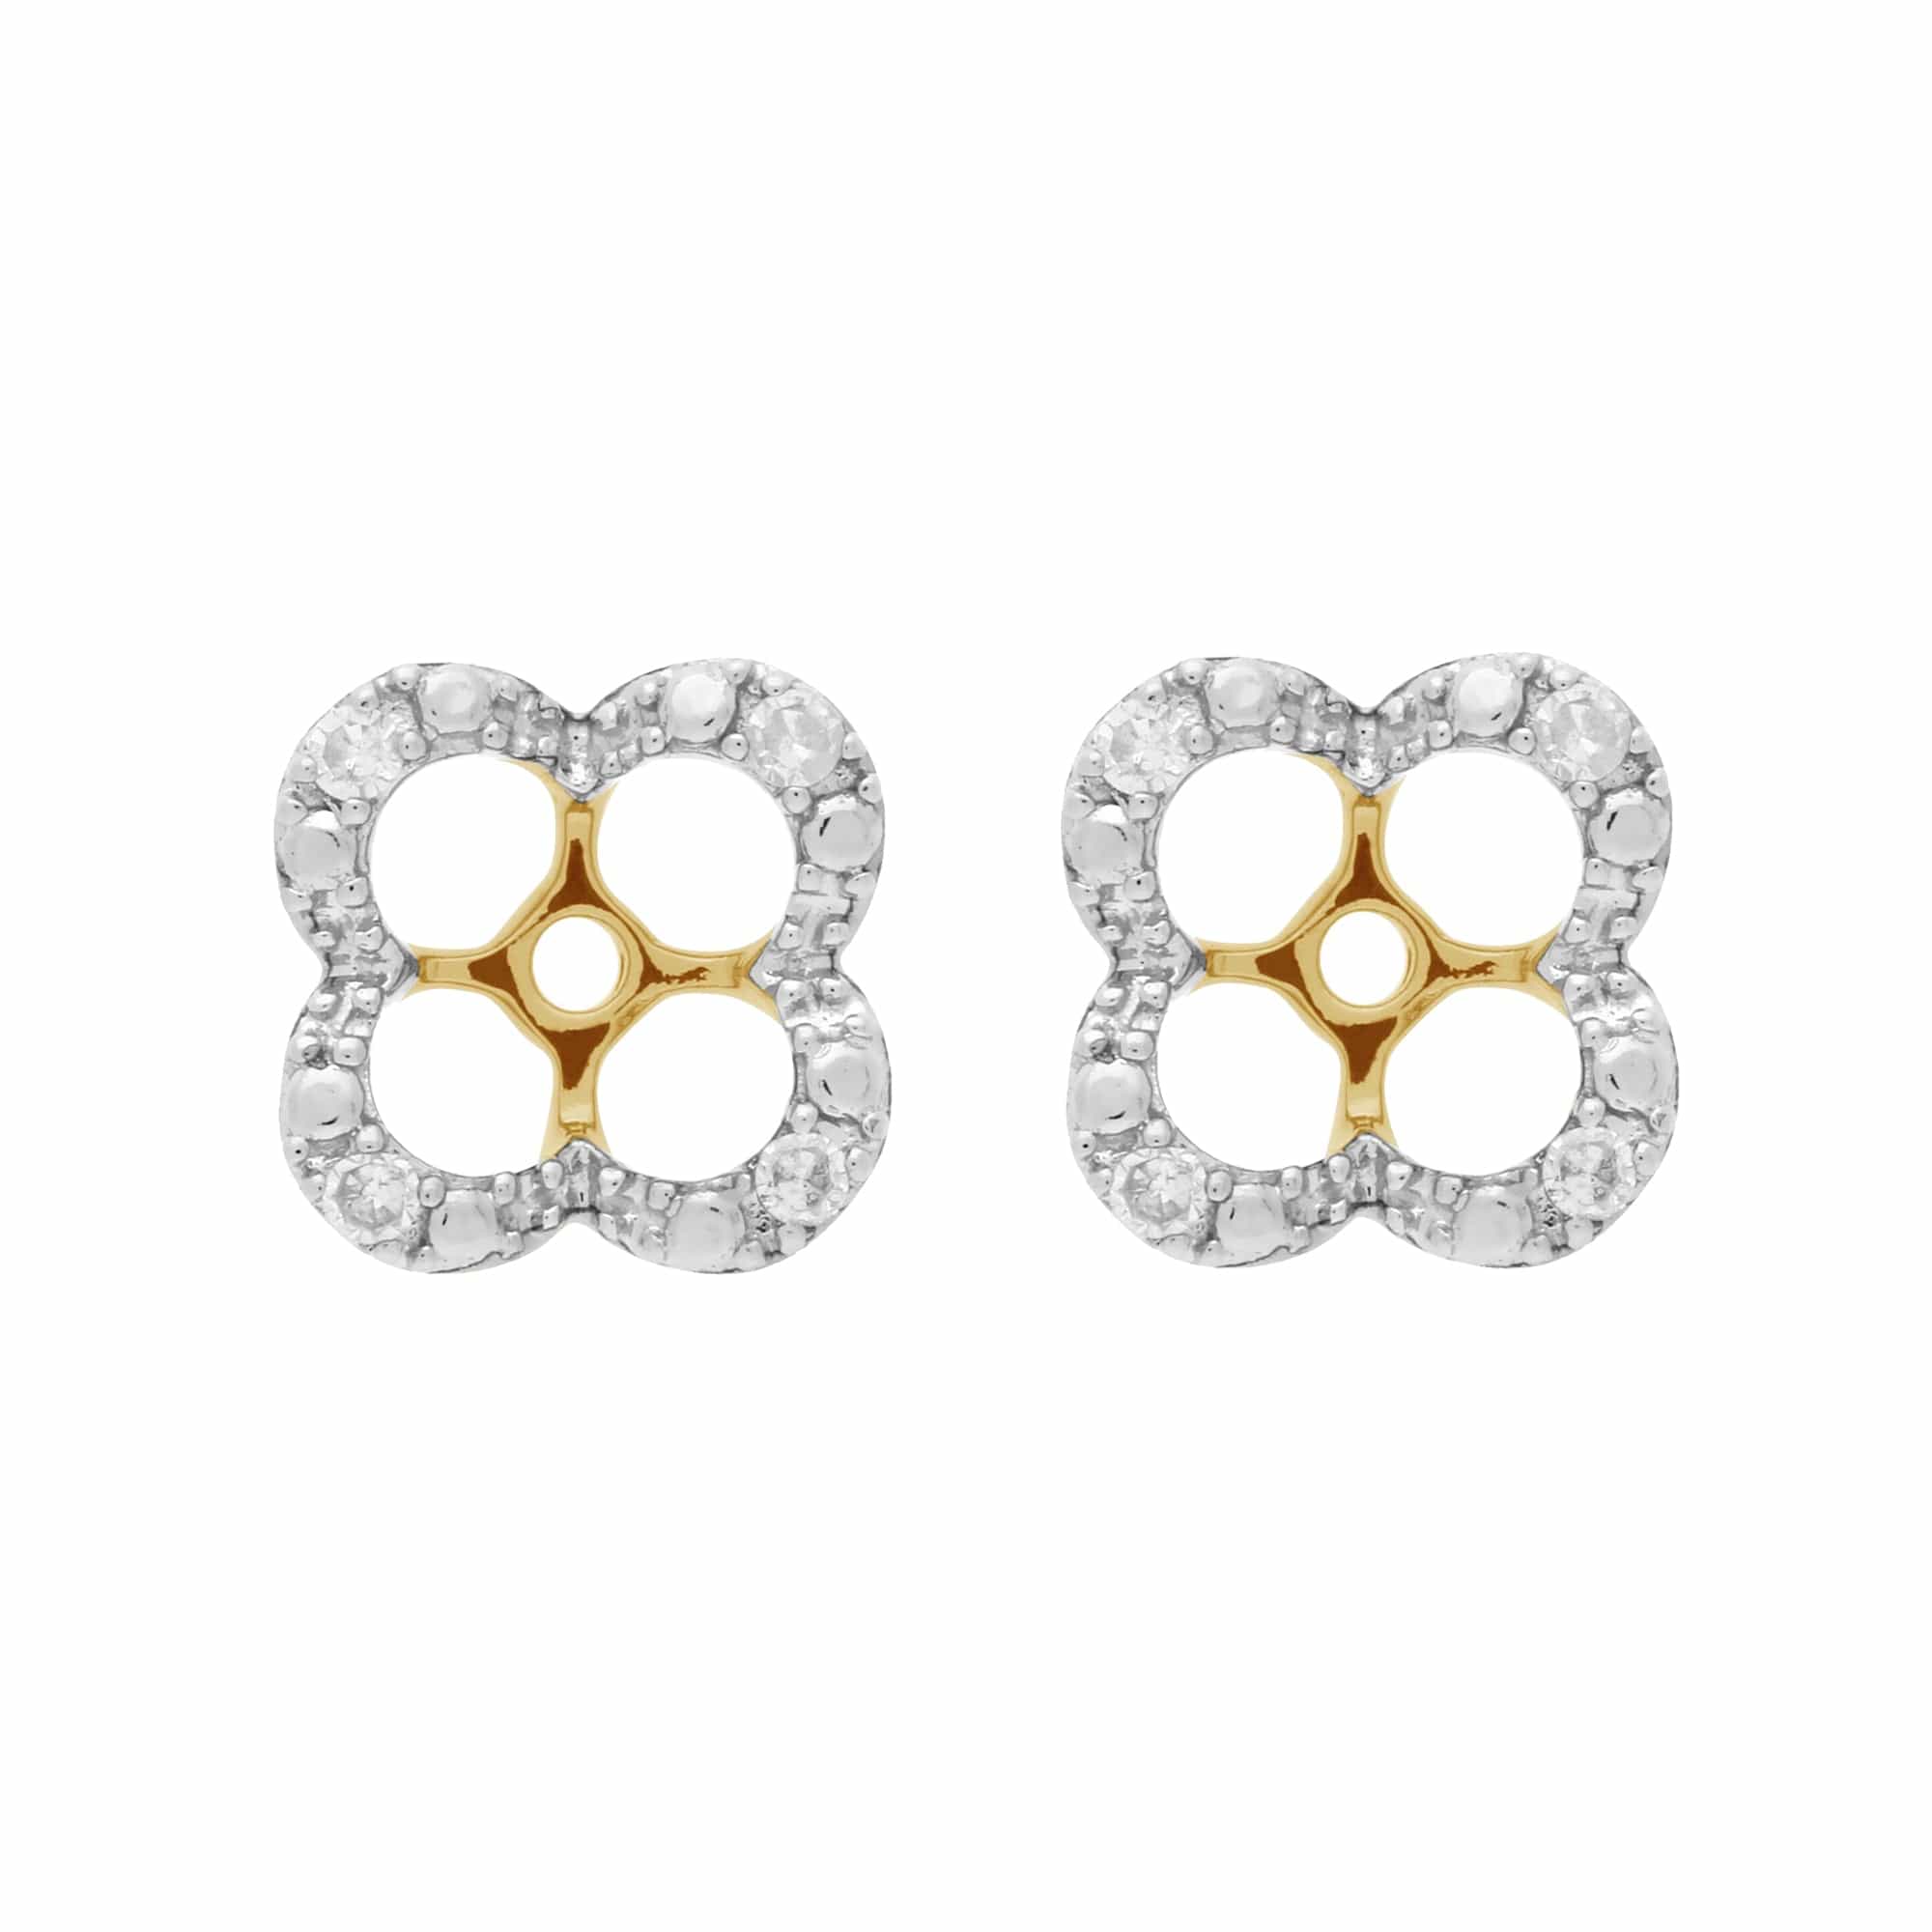 Classic Round Peridot Stud Earrings with Detachable Diamond Floral Ear Jacket in 9ct Yellow Gold - Gemondo